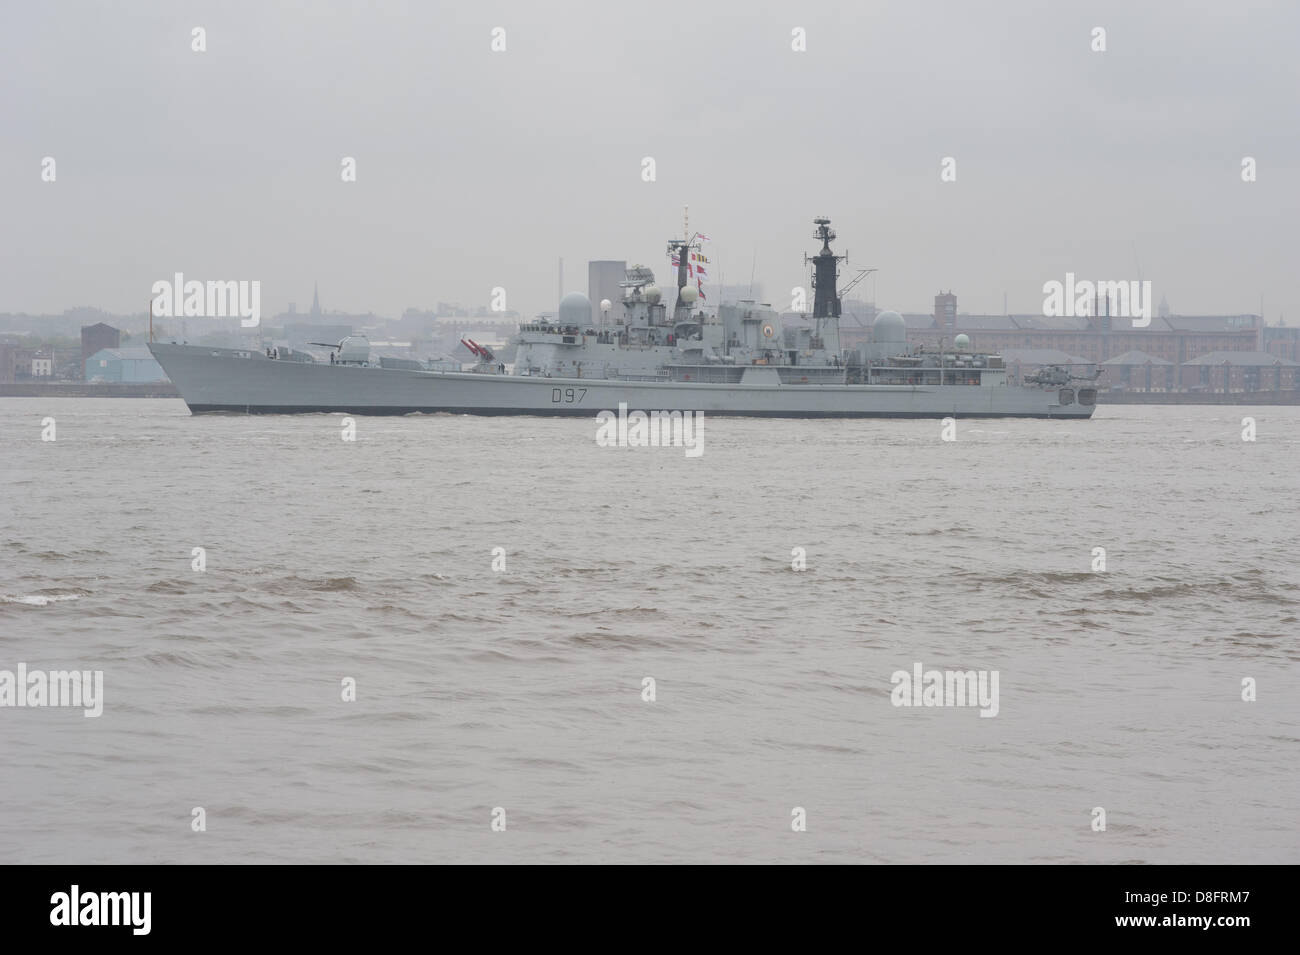 LIVERPOOL, UK, 28th May, 2013. HMS Edinburgh seen leaving Liverpool as part of a Royal Navy fleet visiting the city as part of the 70th Anniversary of the Battle of the Atlantic. Credit:  Peter Carr / Alamy Live News Stock Photo